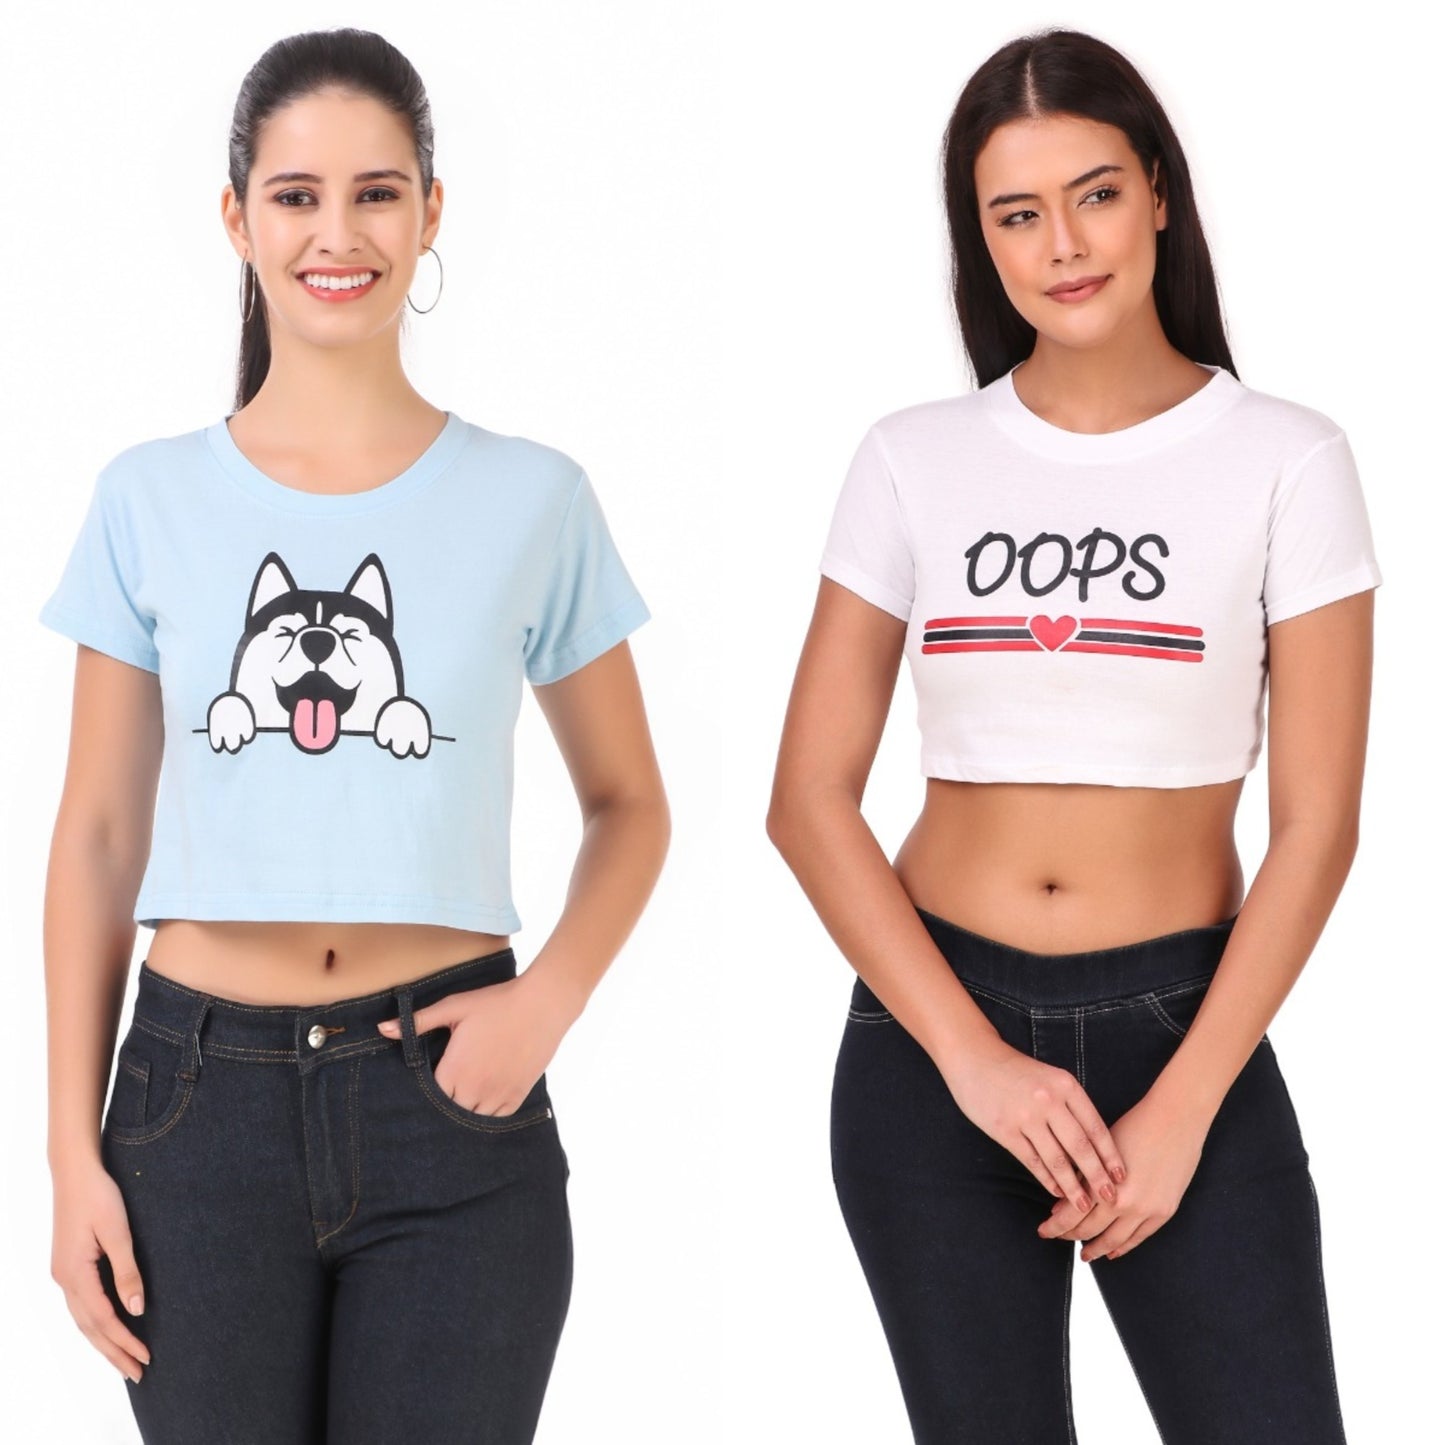 Blue Dog & White Oops Print Combo(2 Tops) Crop Tops!!